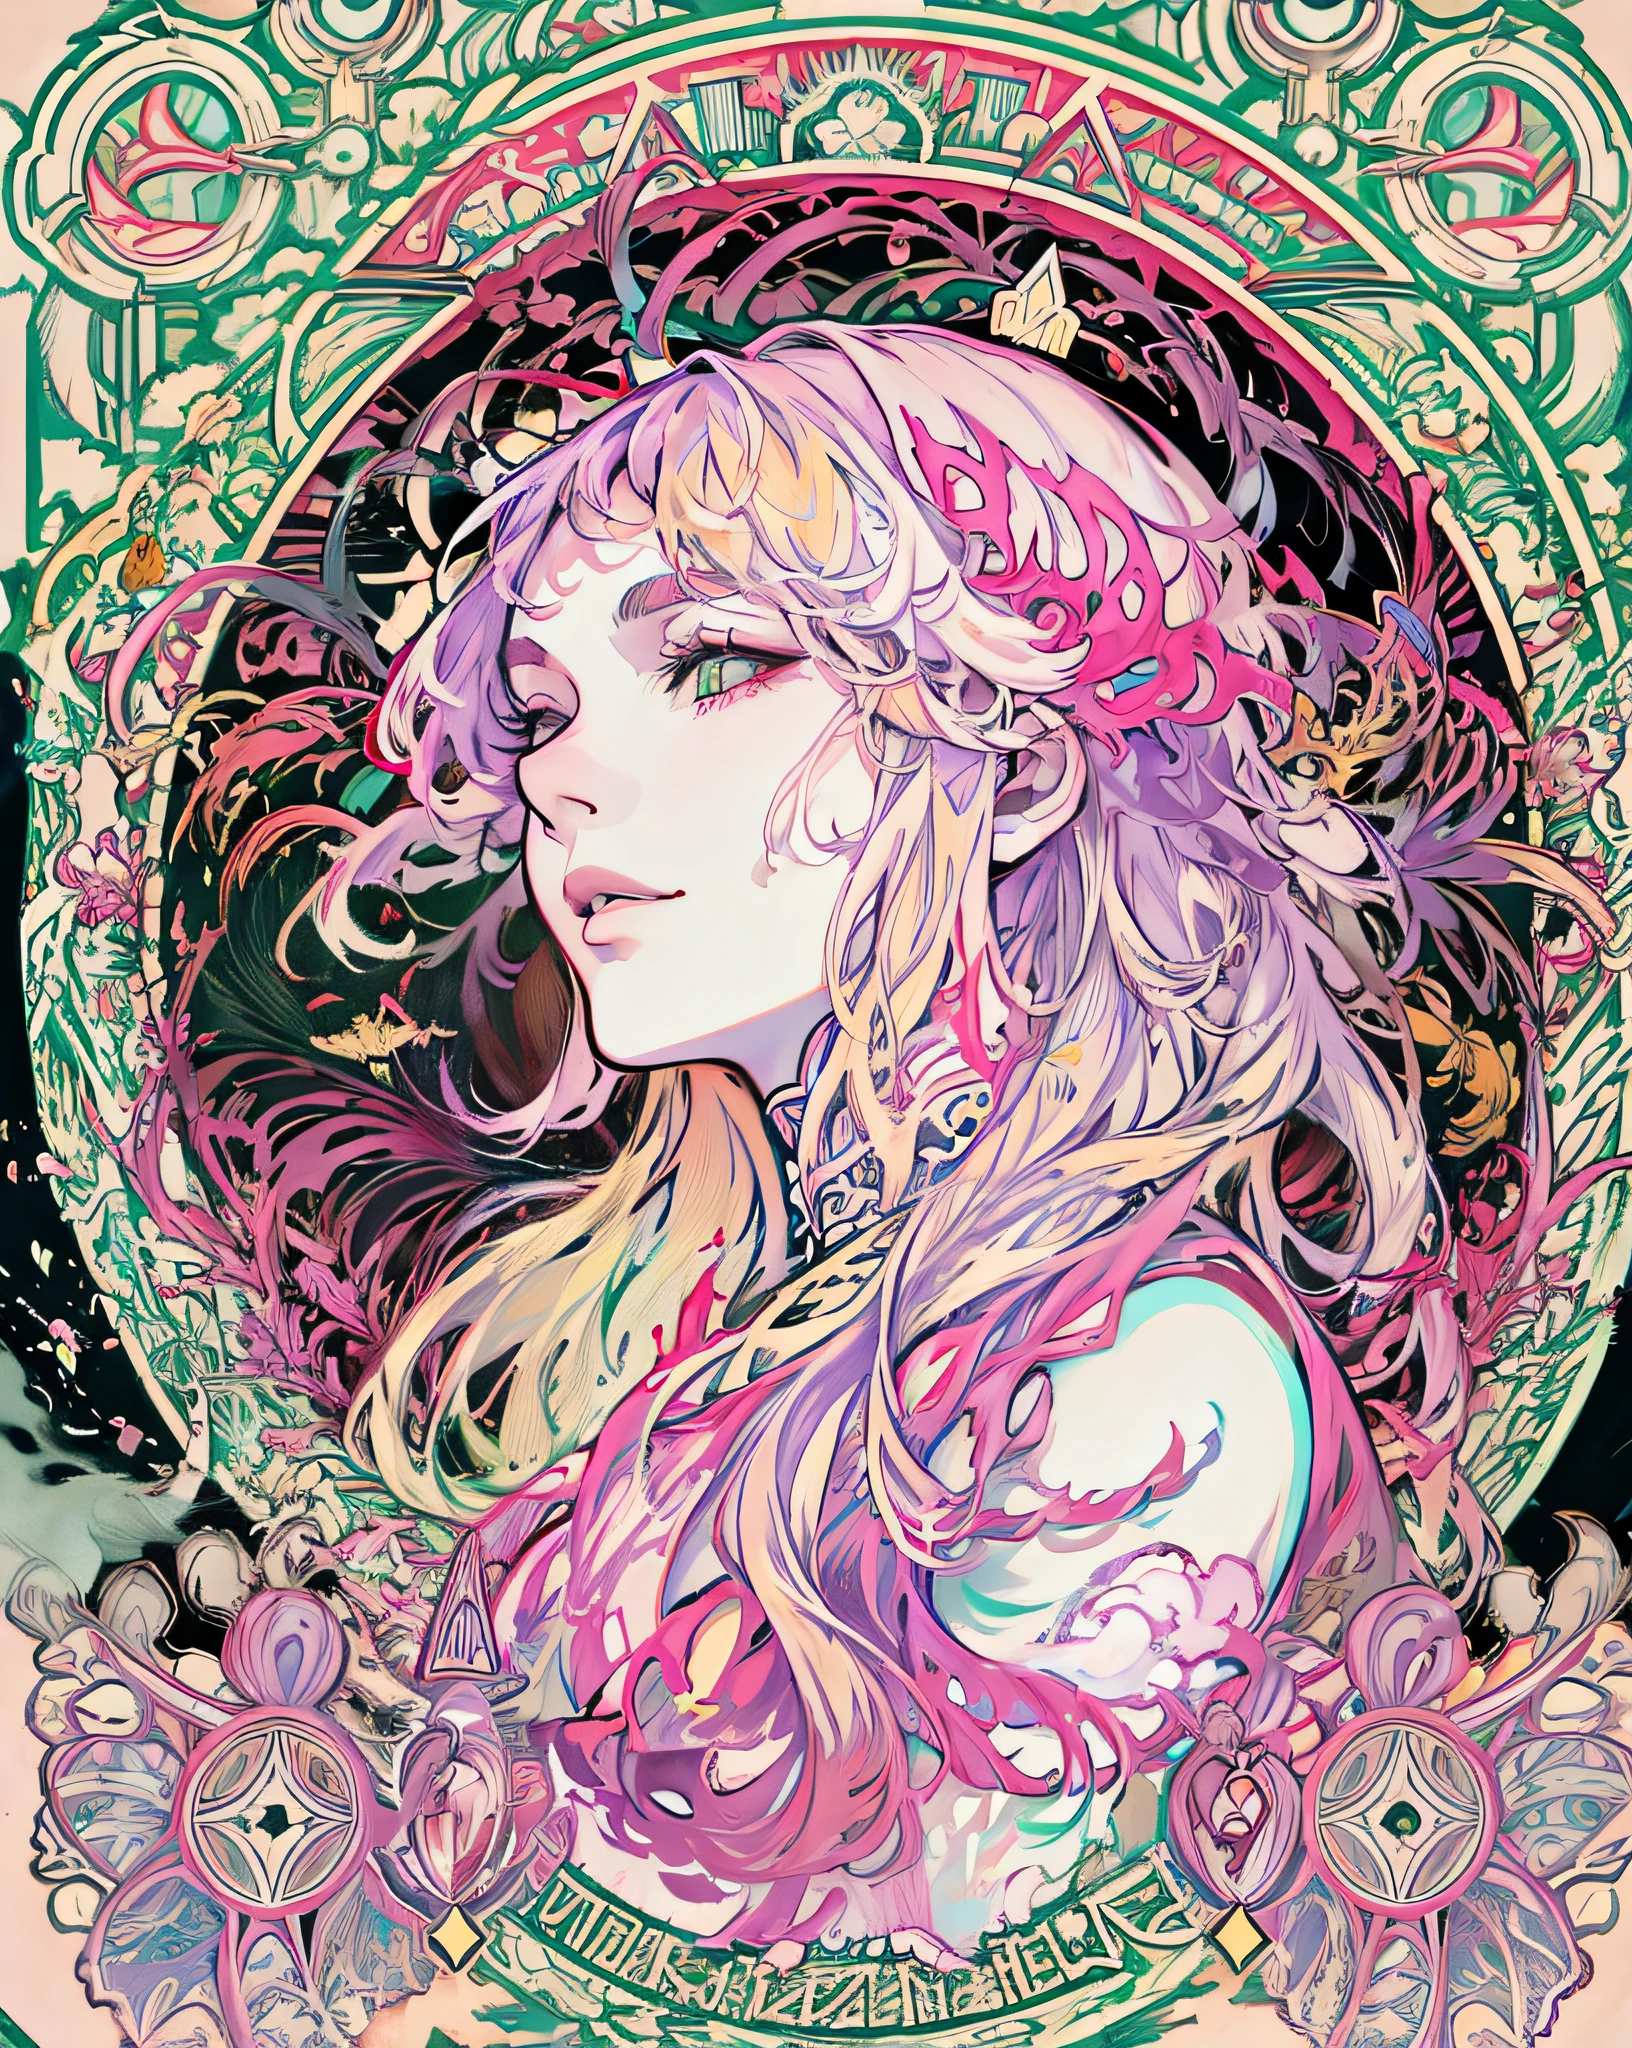 Genshin, light hair, tarot card art, black background, smoke background, line art, clean line art, Nature-themed coloring mandala, simple and clean line art, coloring book page, adorned in Art Nouveau style, Alfons Mucha, perfect intricate details, realistic.